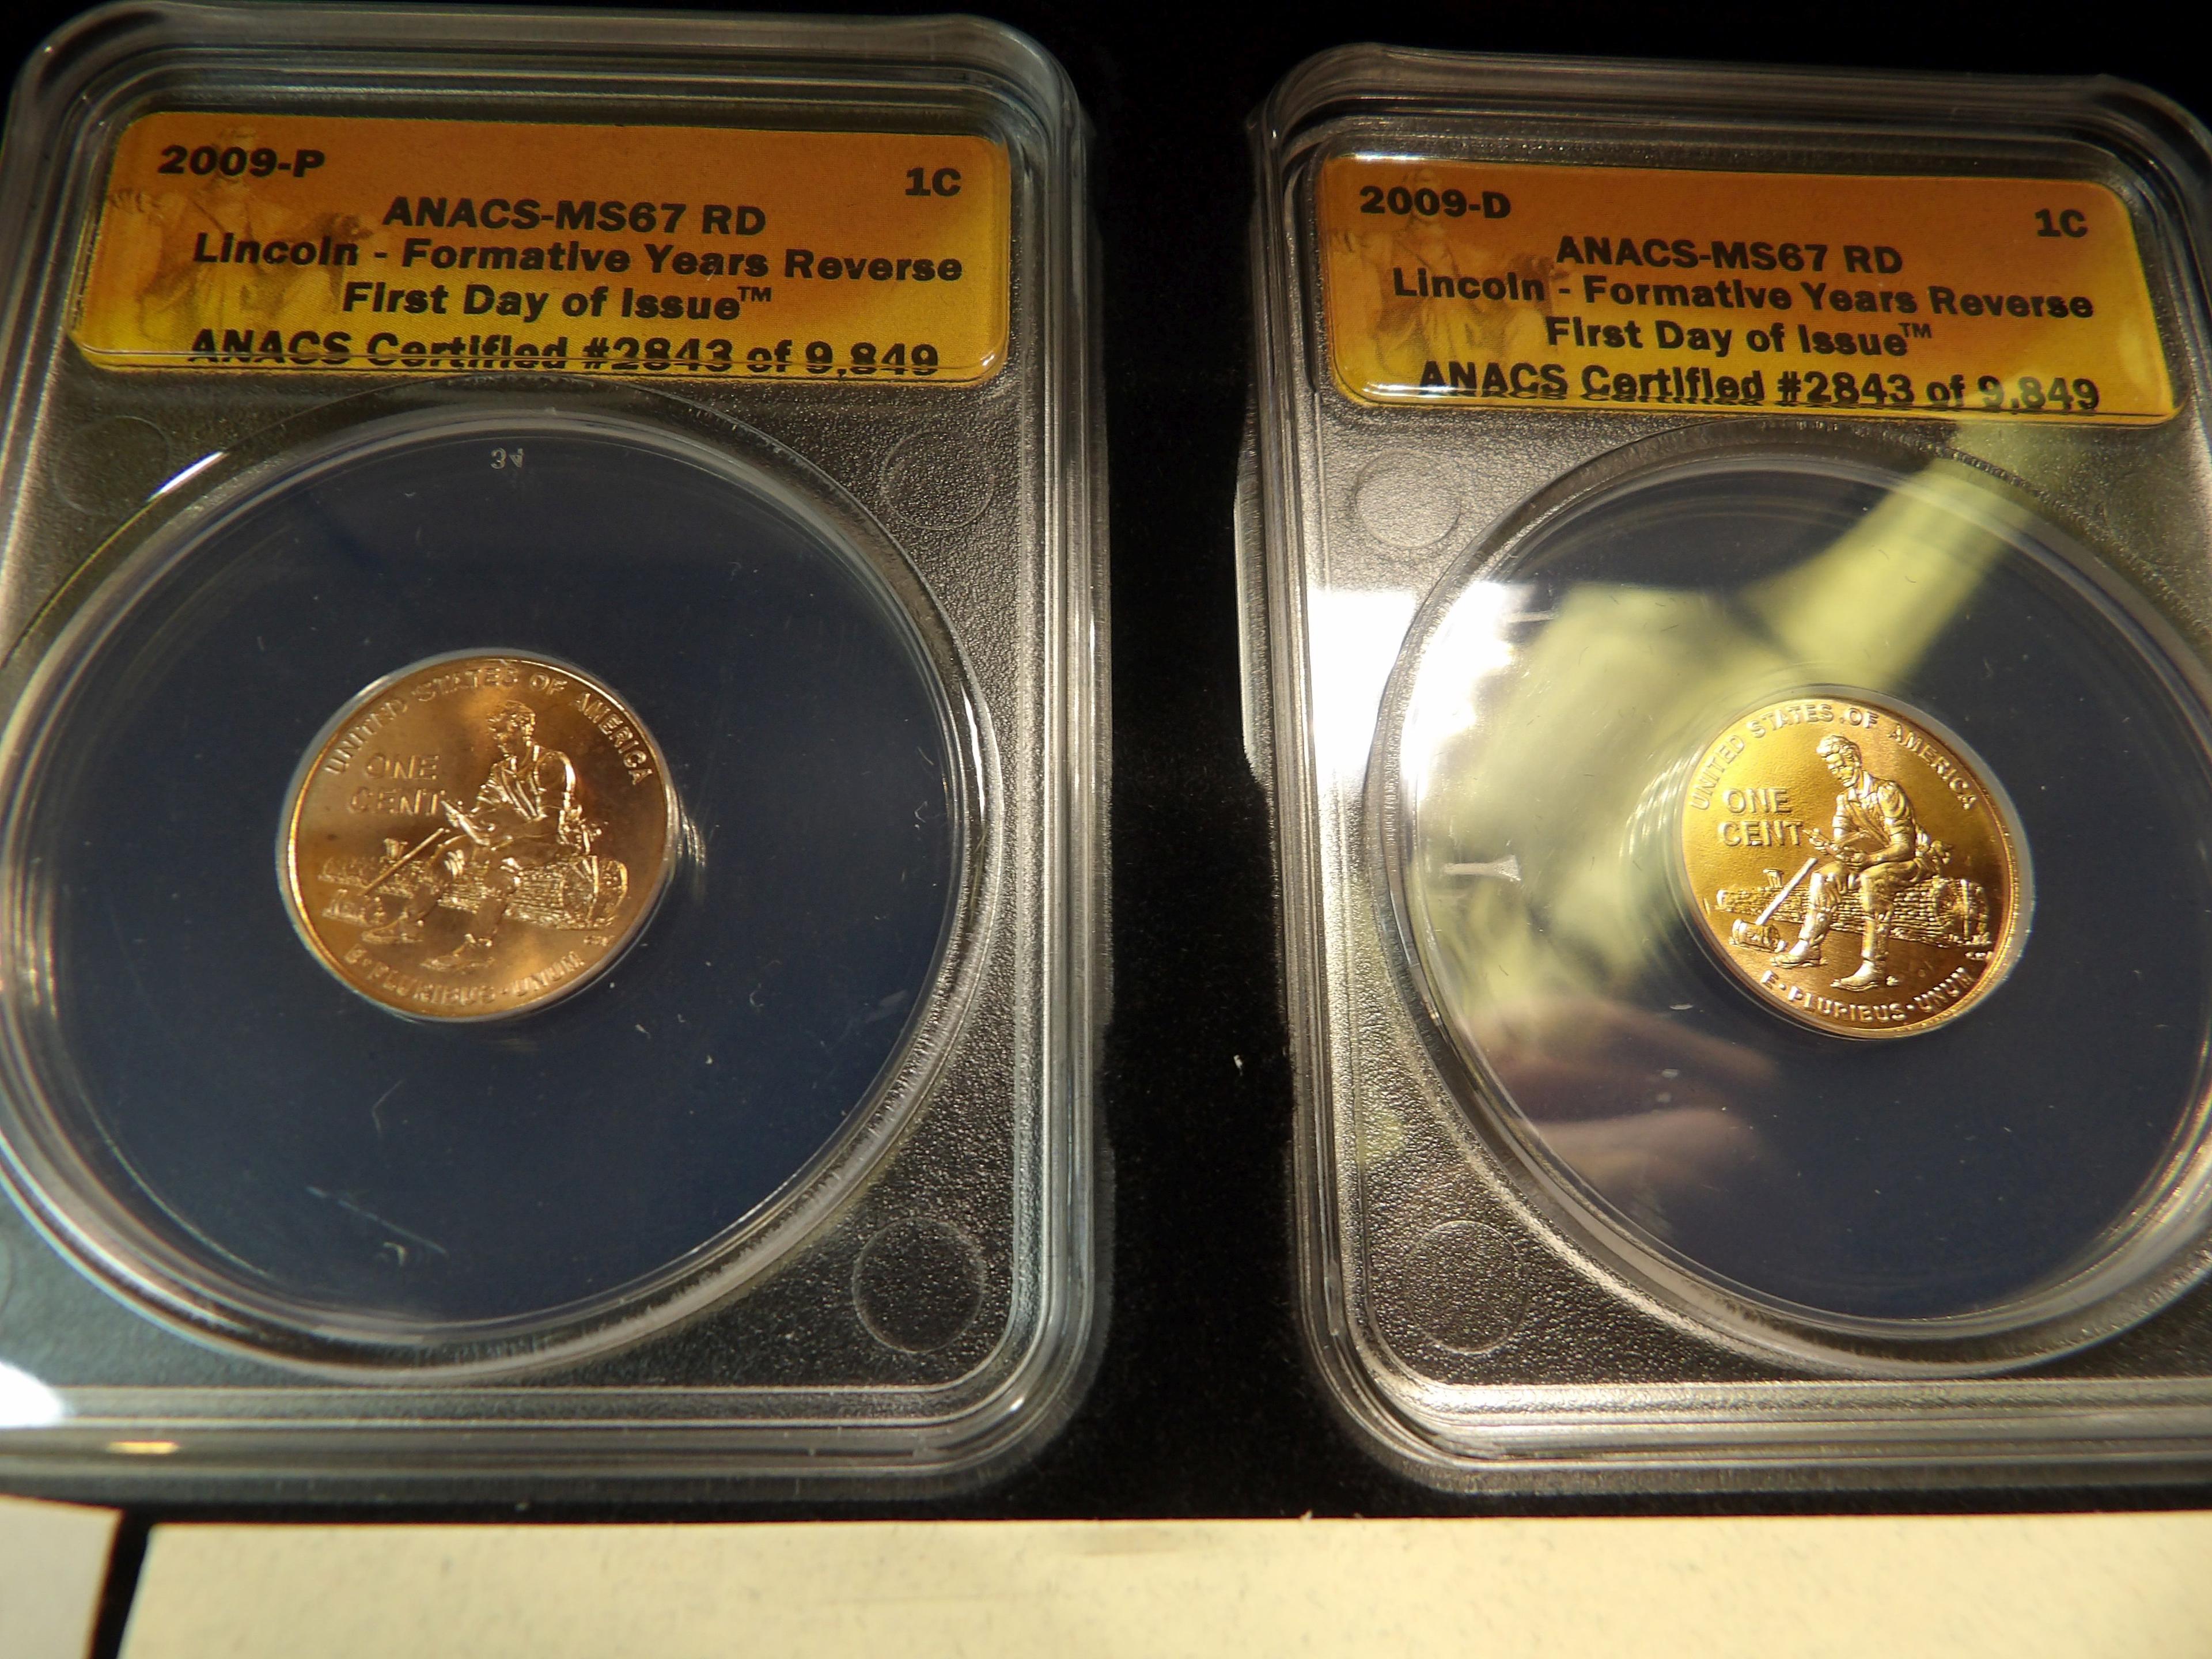 Two-piece Cased Set of 2009 P & D slabbed ANACS MS67 RD Lincoln Formative Years Reverse First Day of